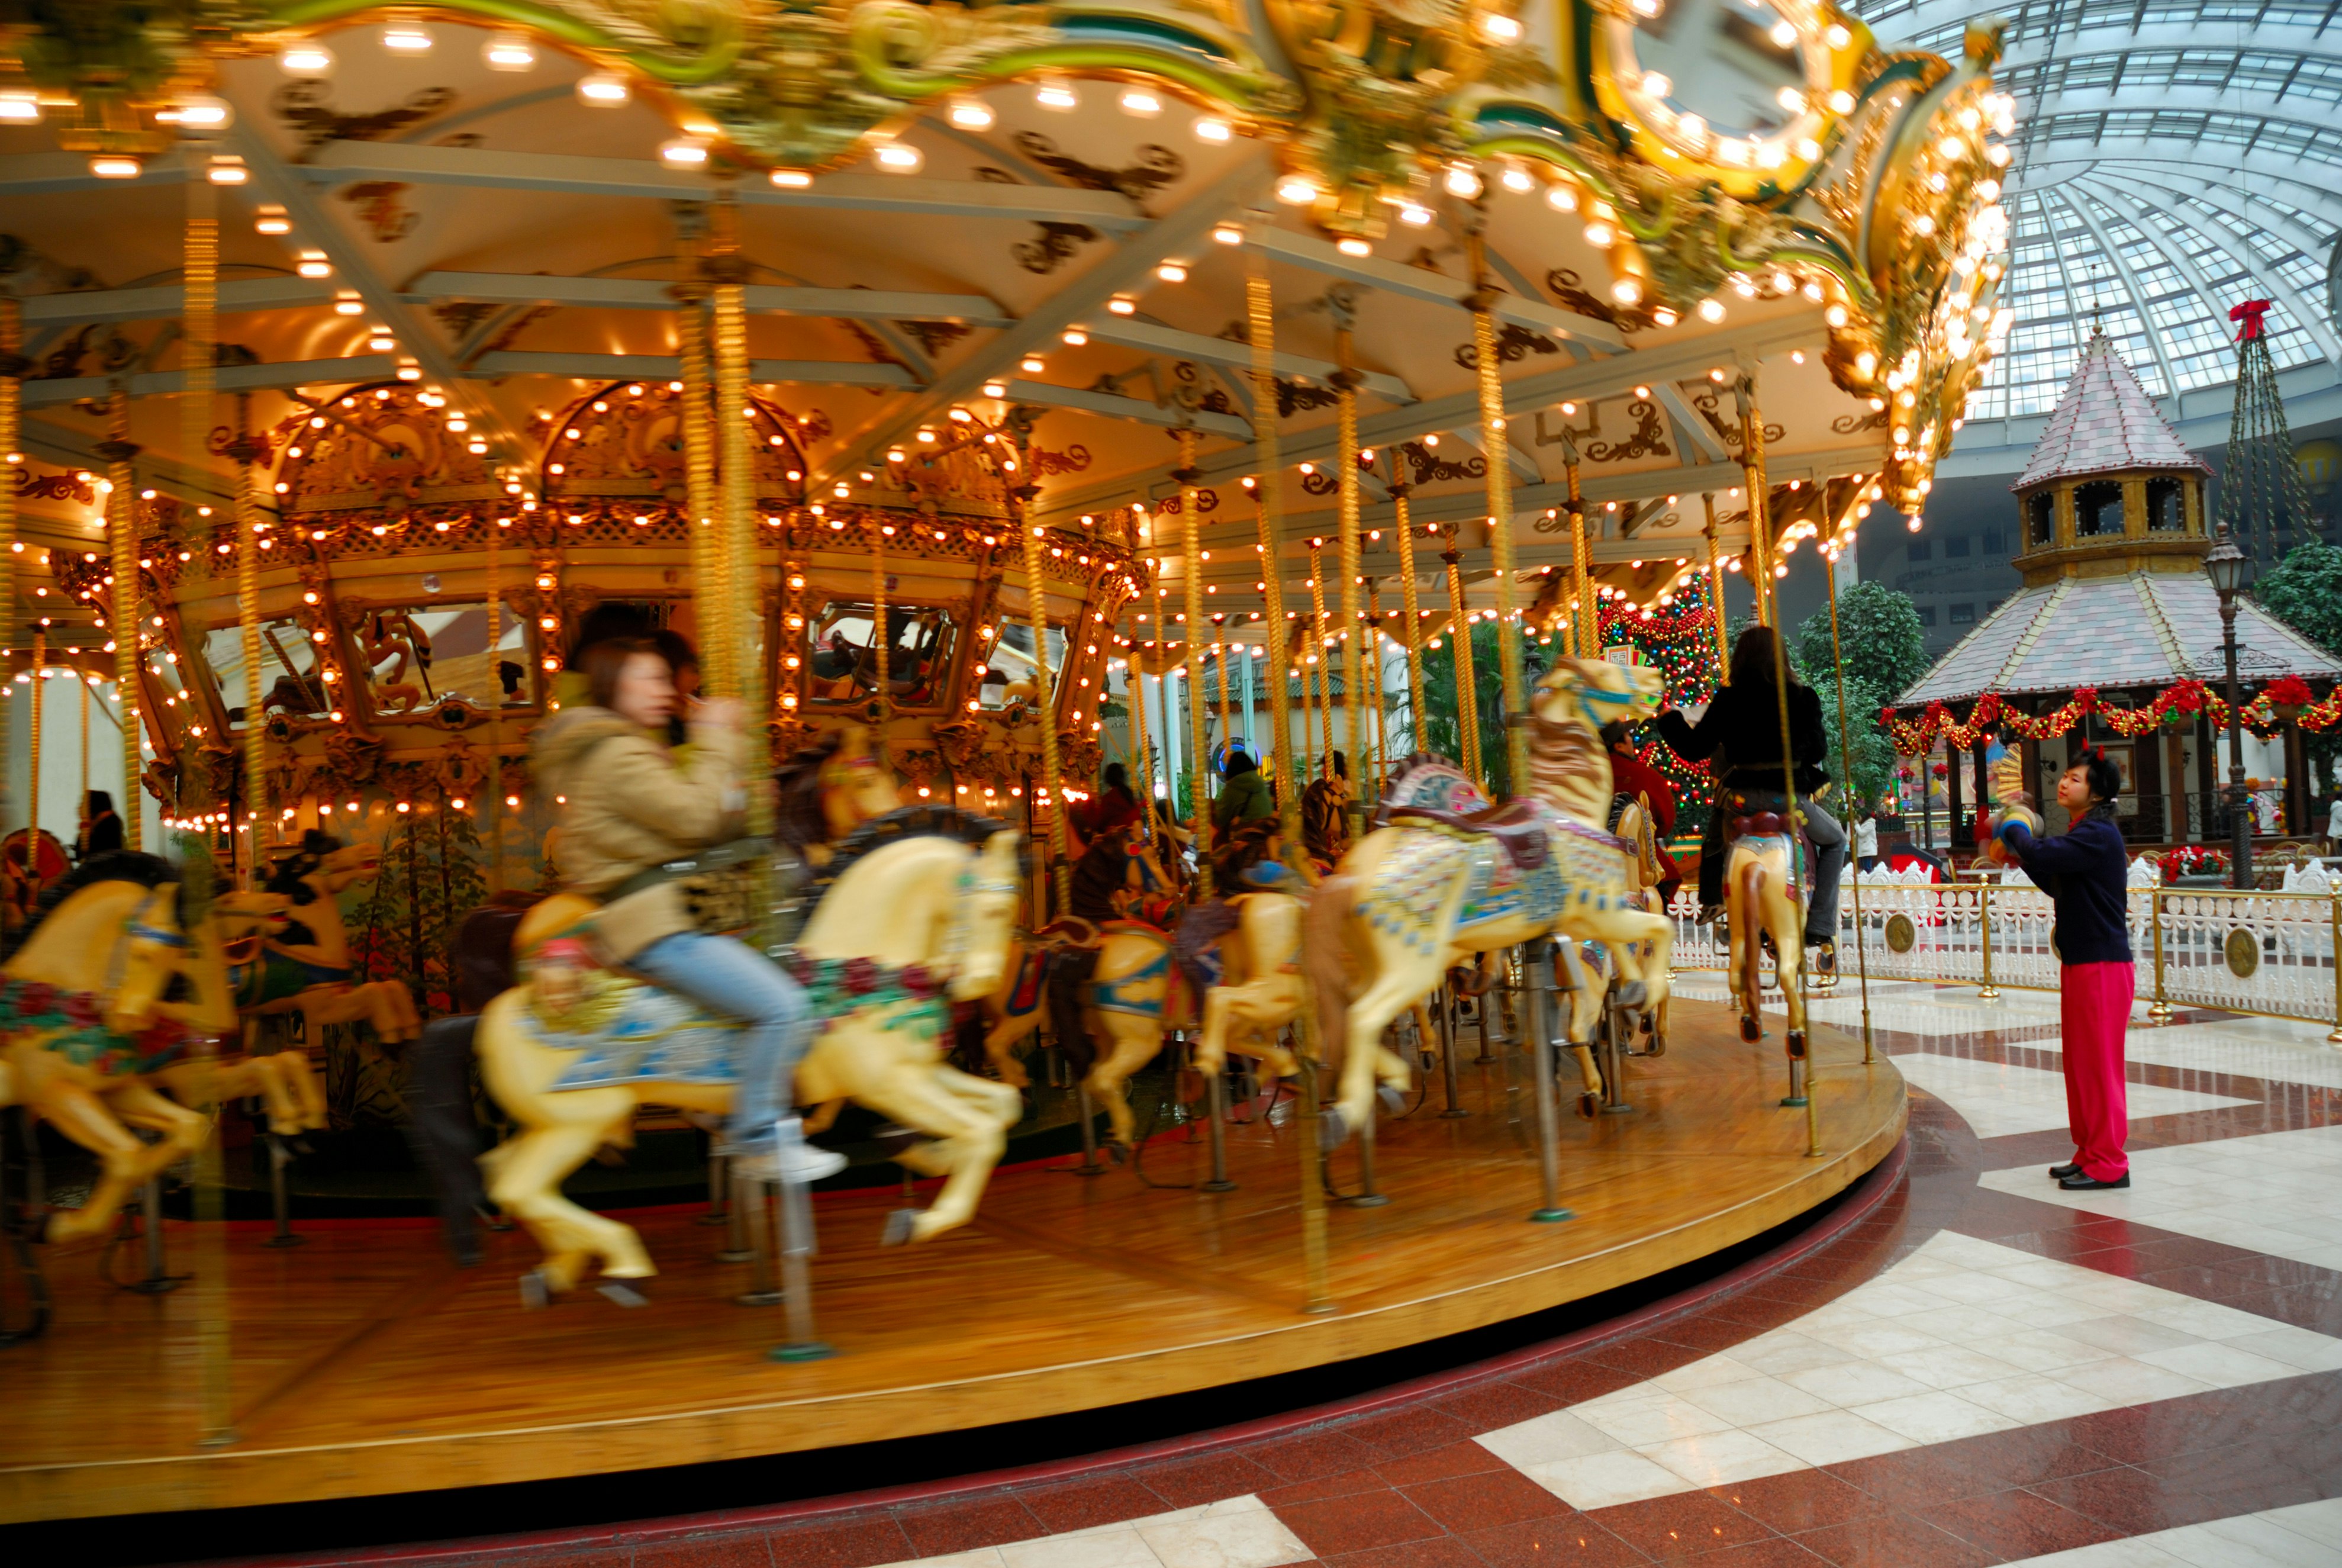 A shot of the carousel at the amusement park Lotte World.